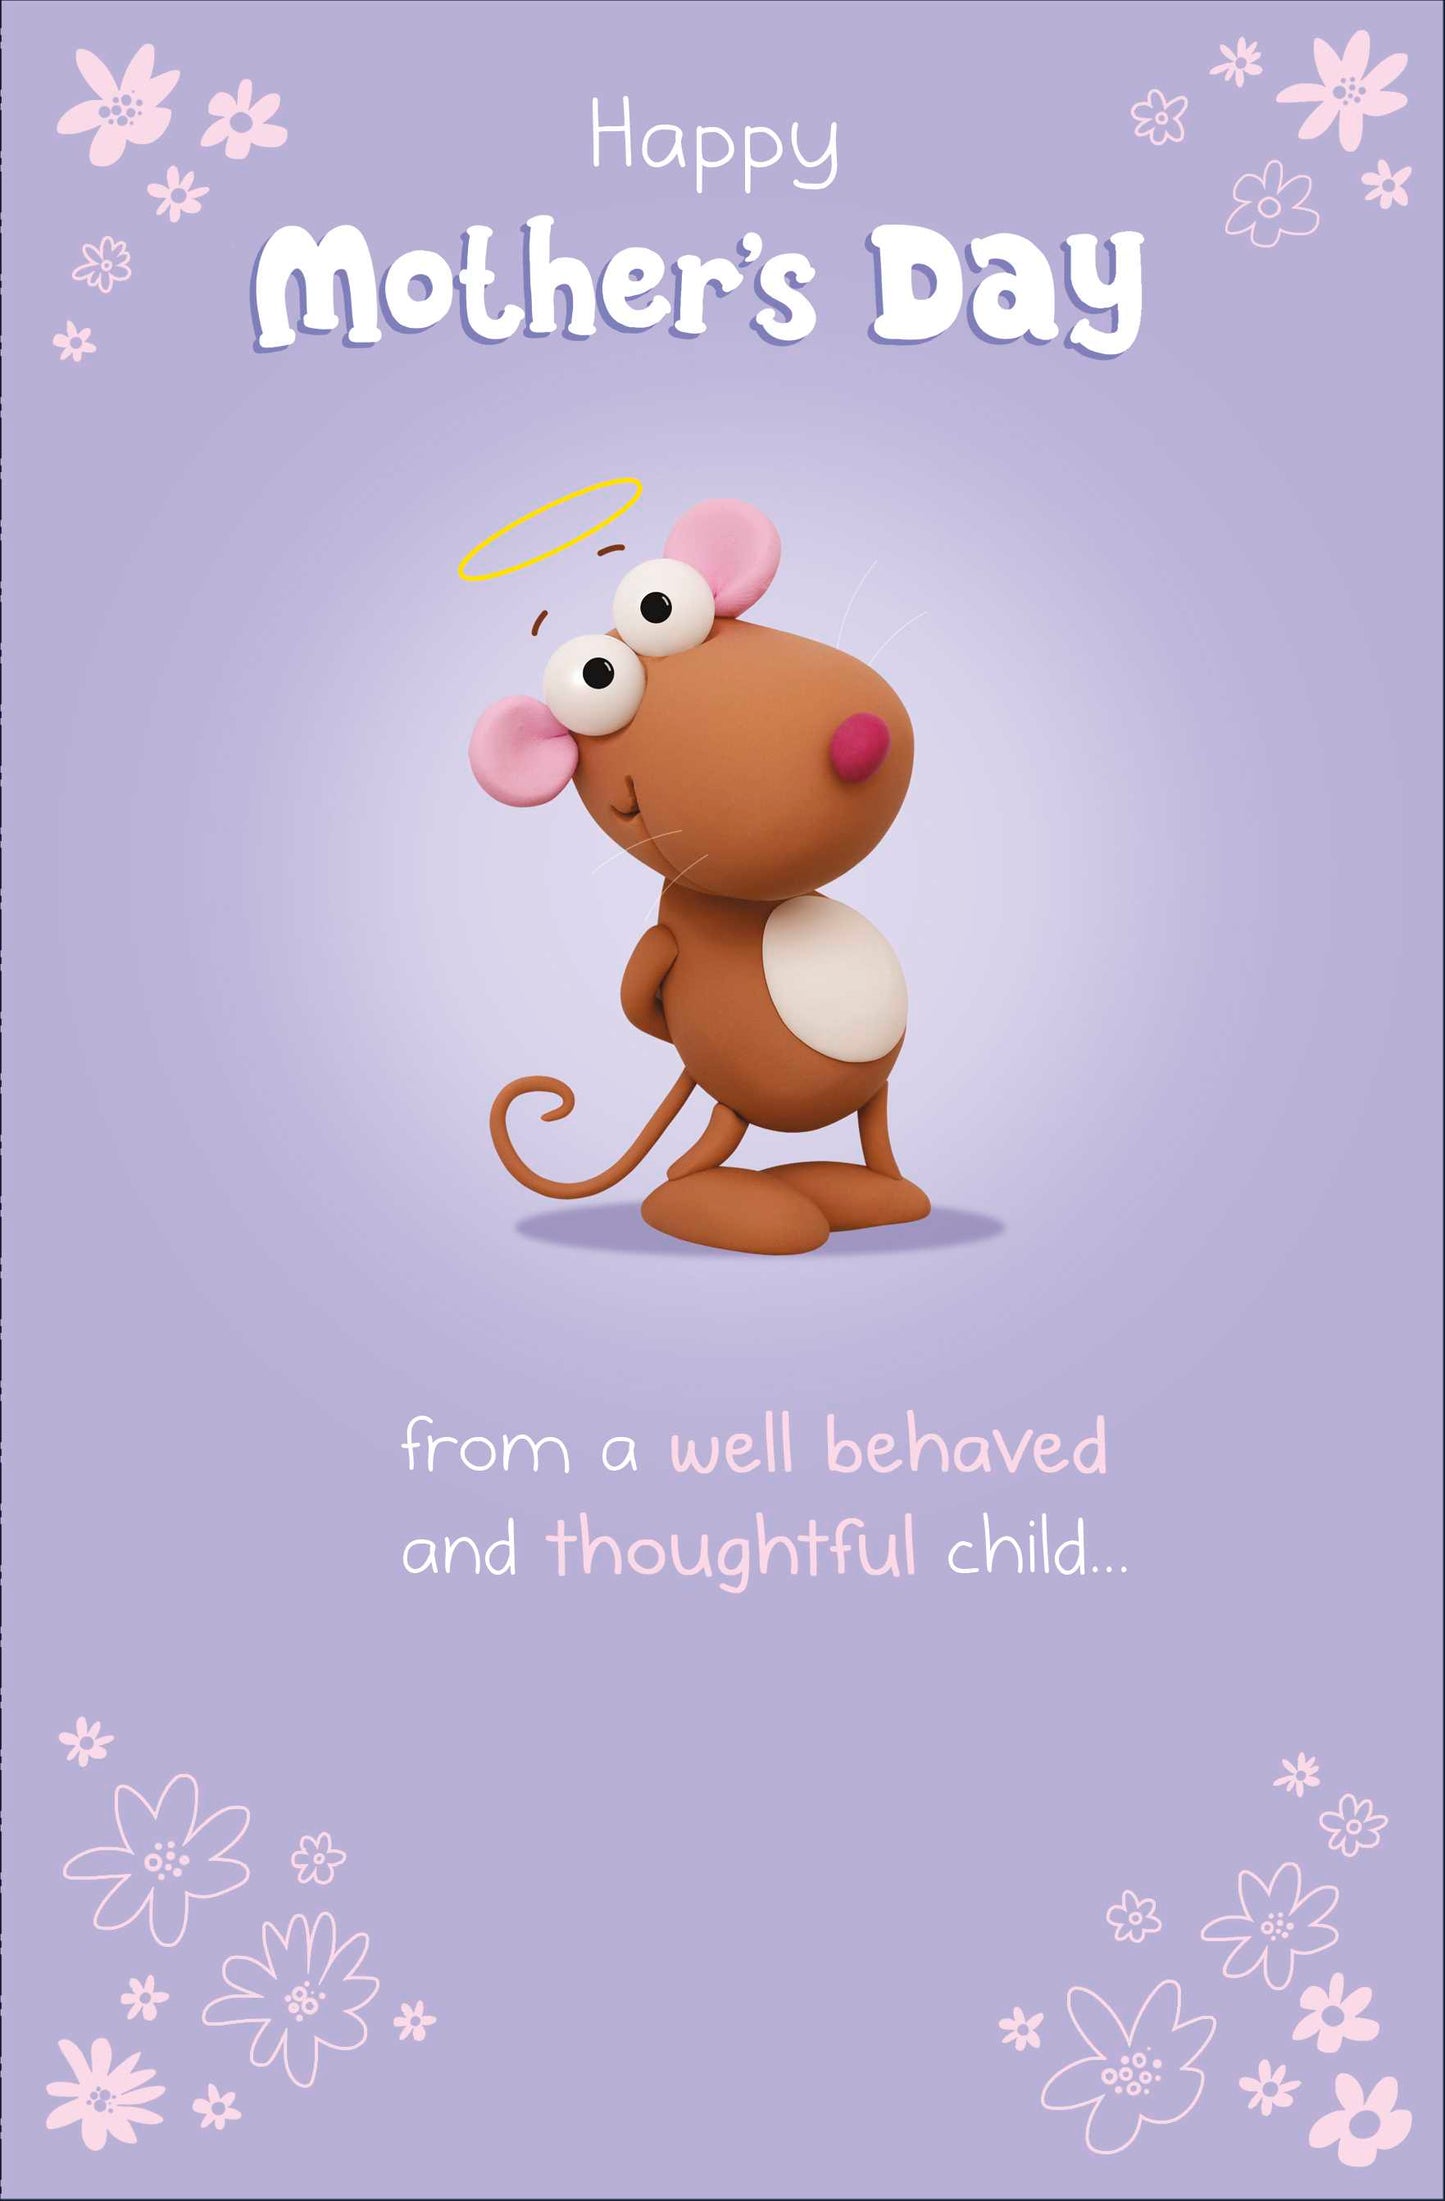 Funny From Well Behaved Child Happy Mother's Day Card